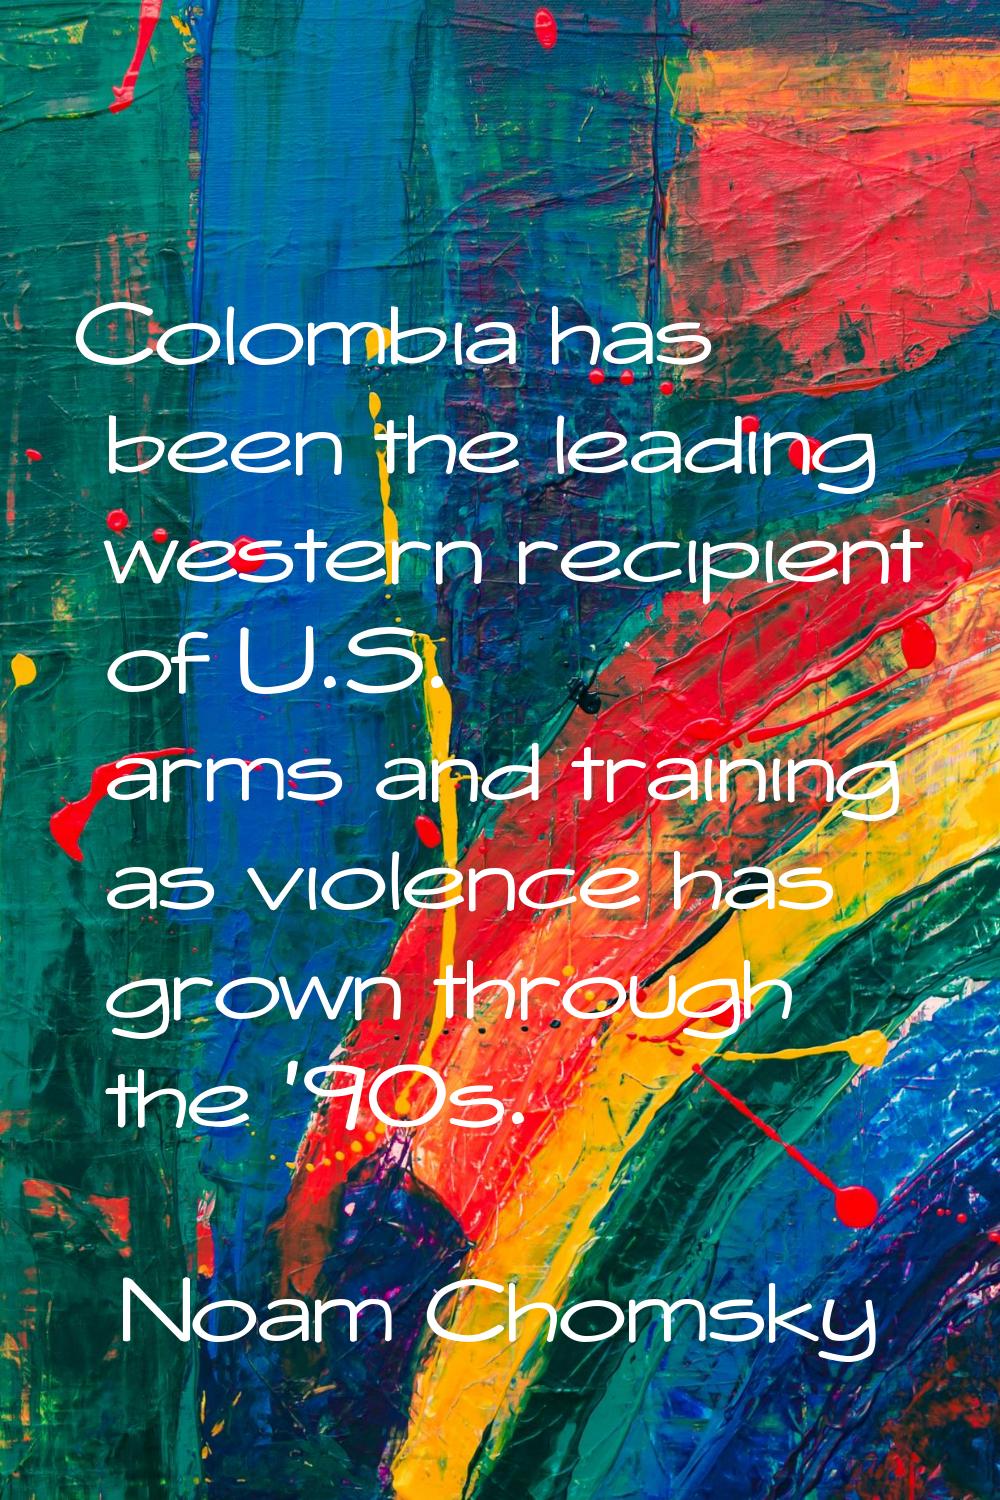 Colombia has been the leading western recipient of U.S. arms and training as violence has grown thr